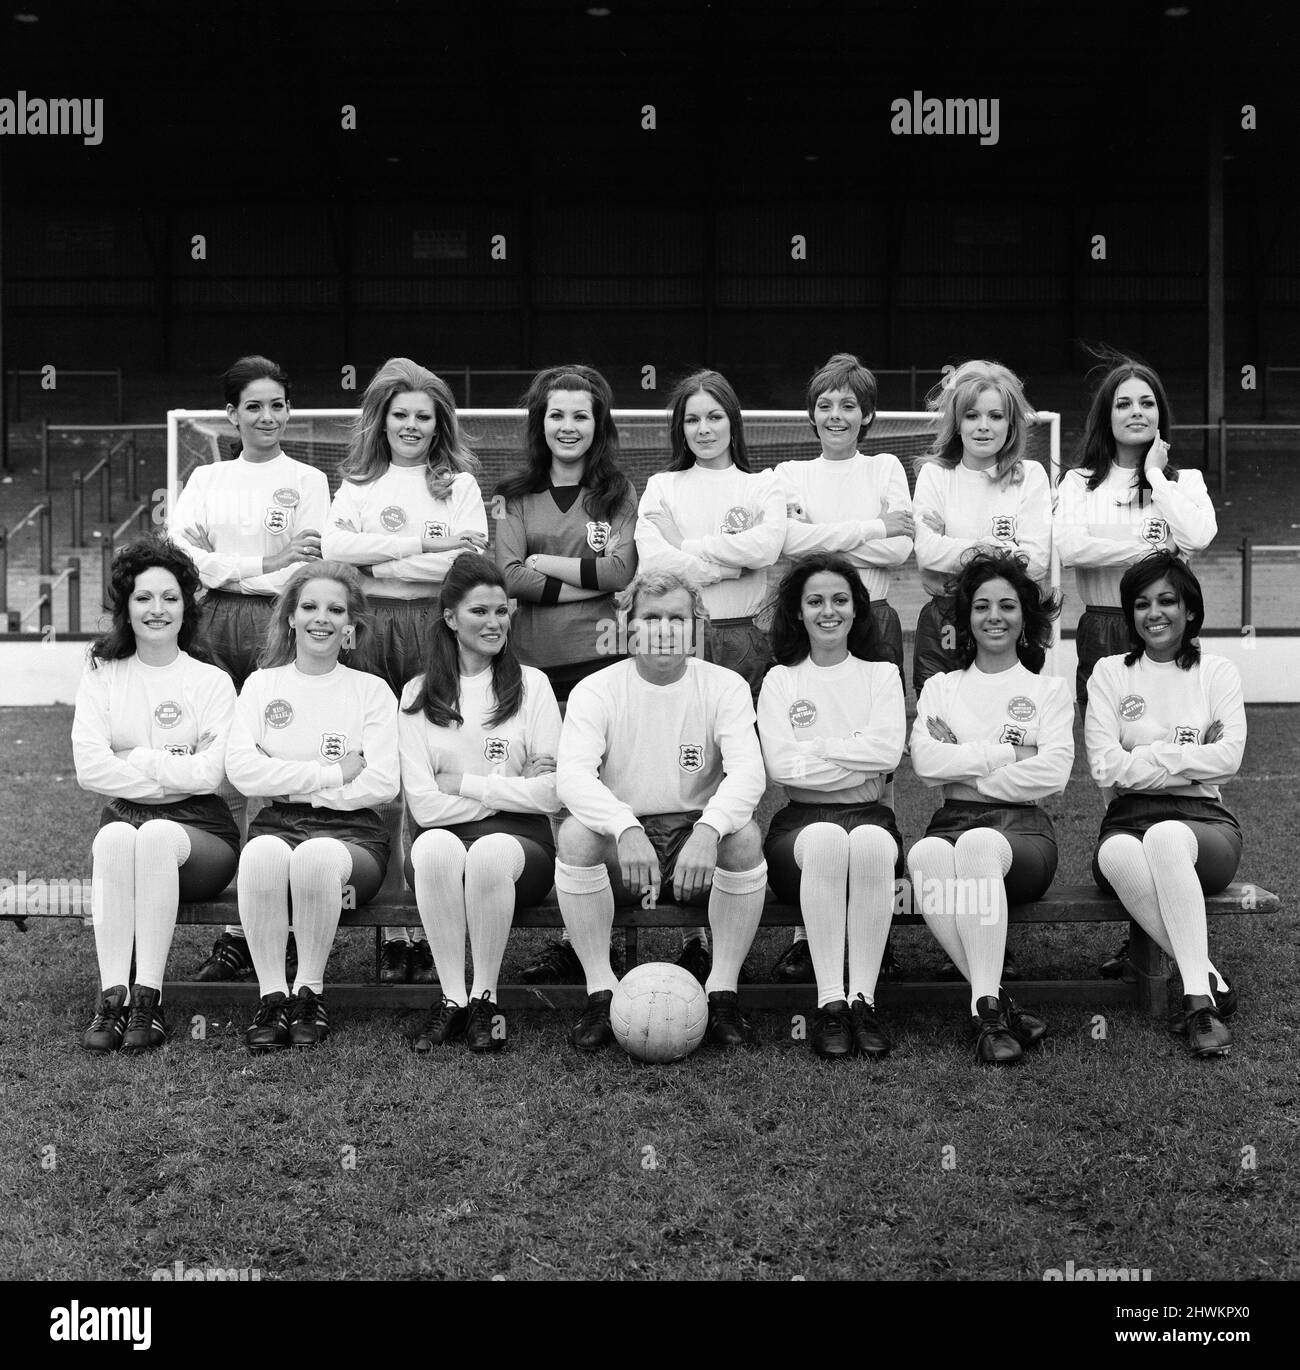 England captain Bobby Moore is pictured his own World Cup team in full England strip. They are Bobby's final choice for the Miss World 1971 contest, unfortunately he could not attend the final himself as he had the little matter of captaining England against Switzerland on the same night as the Miss World contest. They are pictured at West Ham's stadium. Back row, Miss Venezuela Ana Maria, Miss Australia Valerie Roberts, Miss Germany Irene Neumann, Miss Paraguay Rosa Maria Nelgarejo, Miss Brazil Lucia Petterlee, Miss United Kingdom Marilyn Ward, Miss USA Brucene Smith. Front Row, Miss Ireland Stock Photo